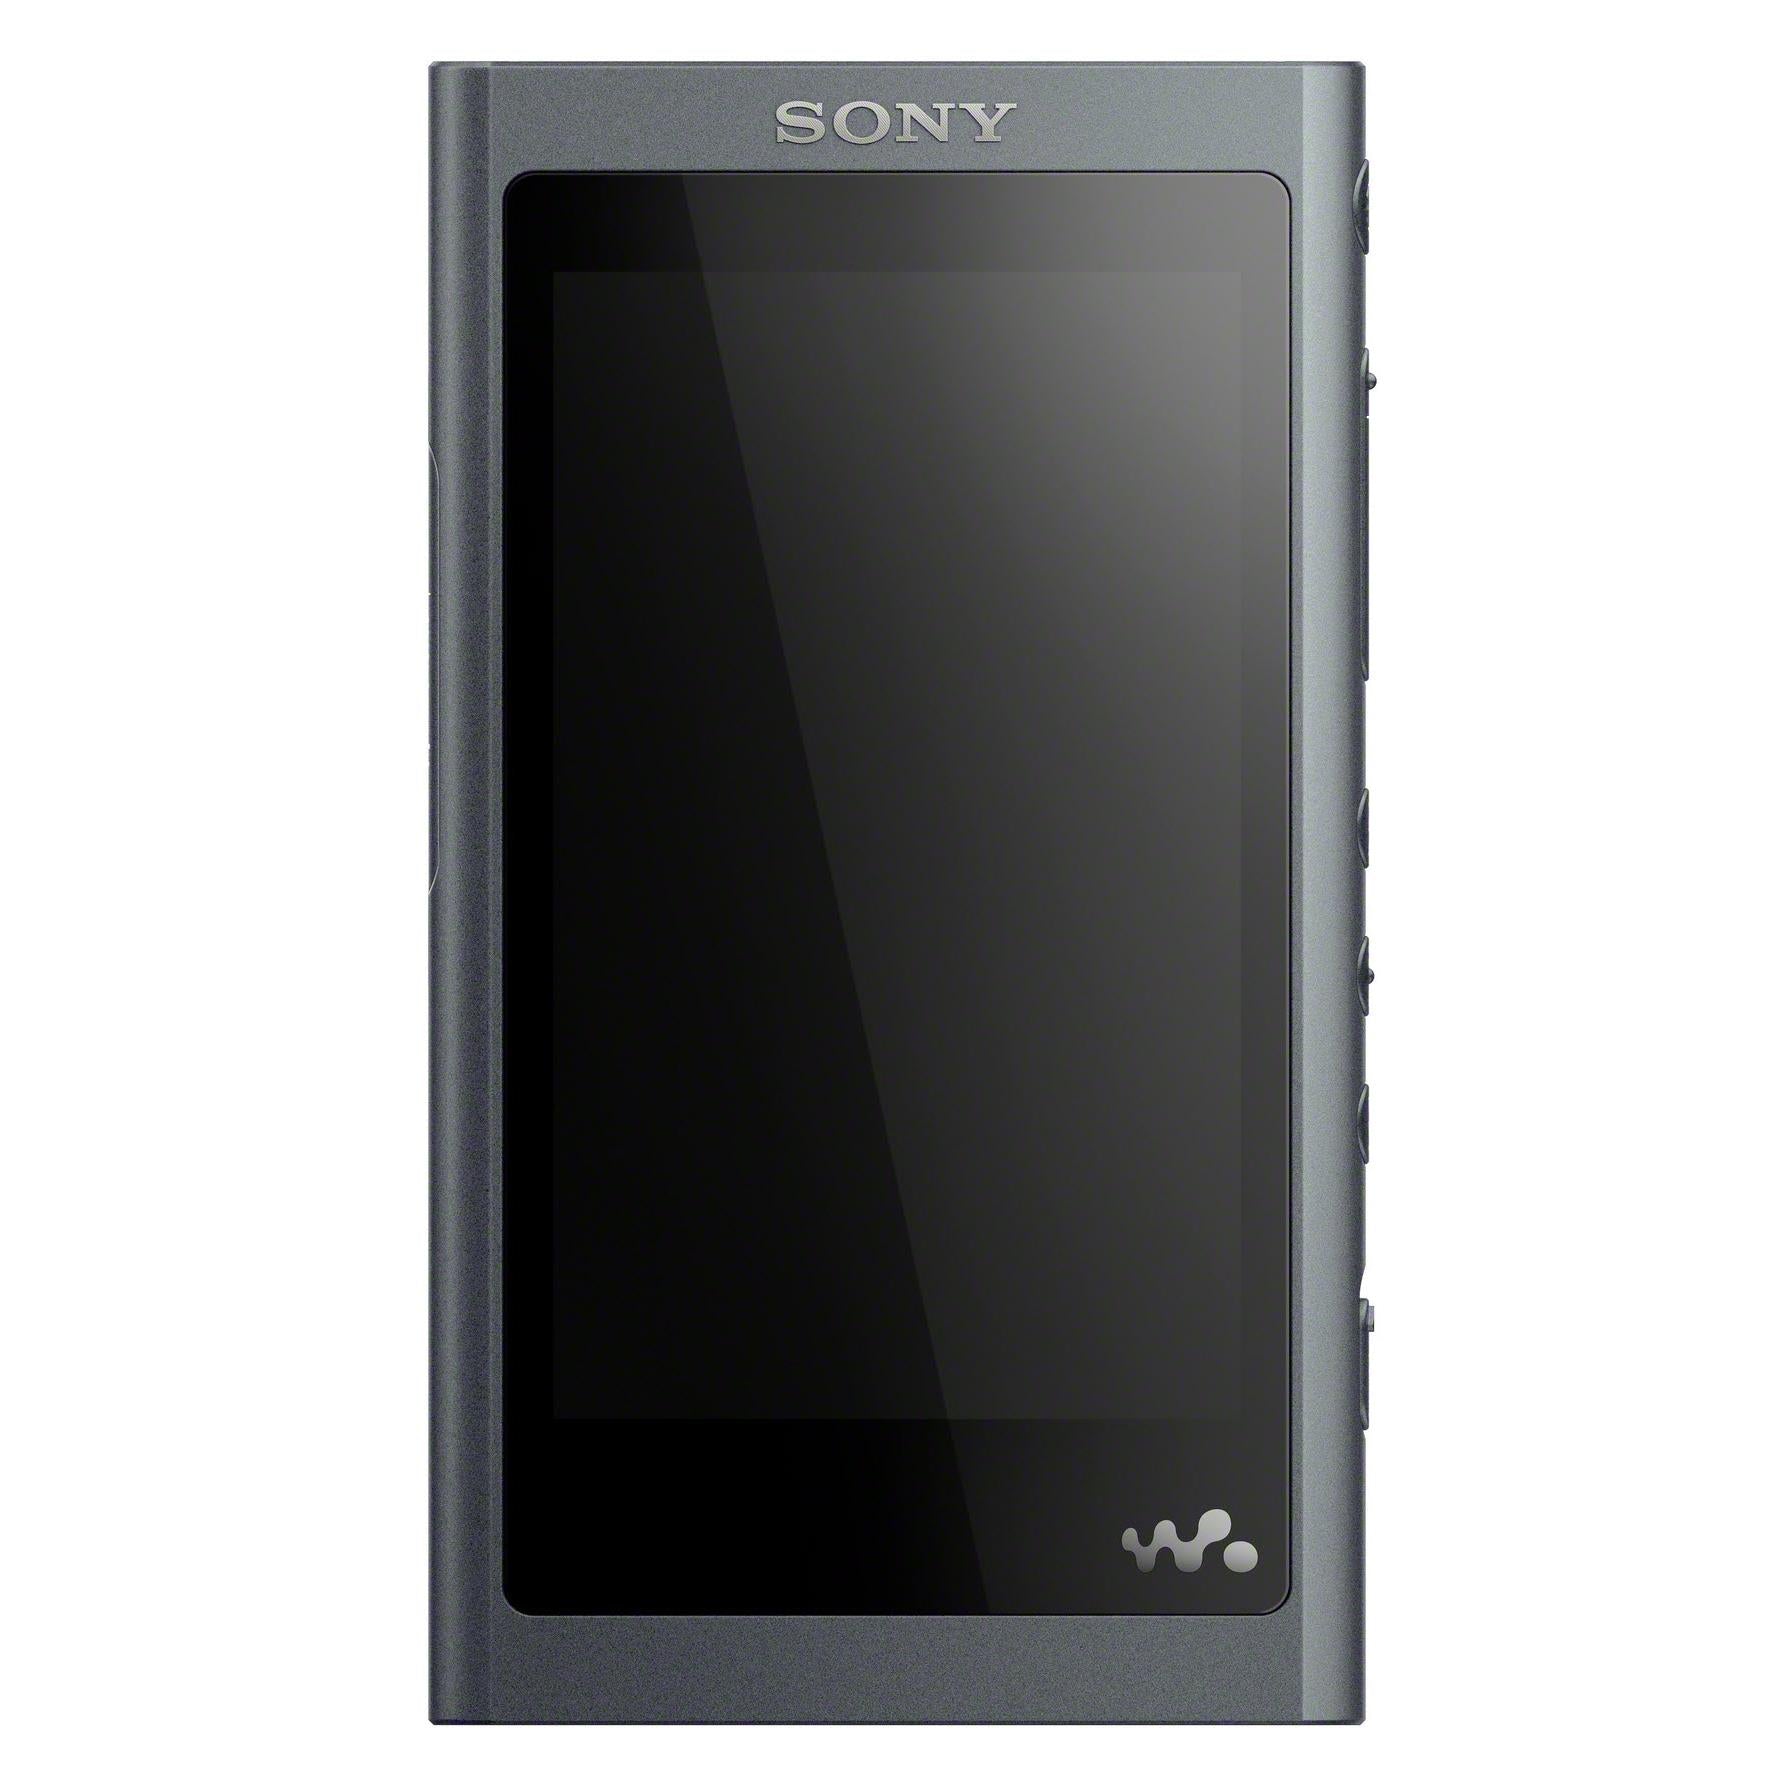 sony nw-a55 walkman with high-resolution audio